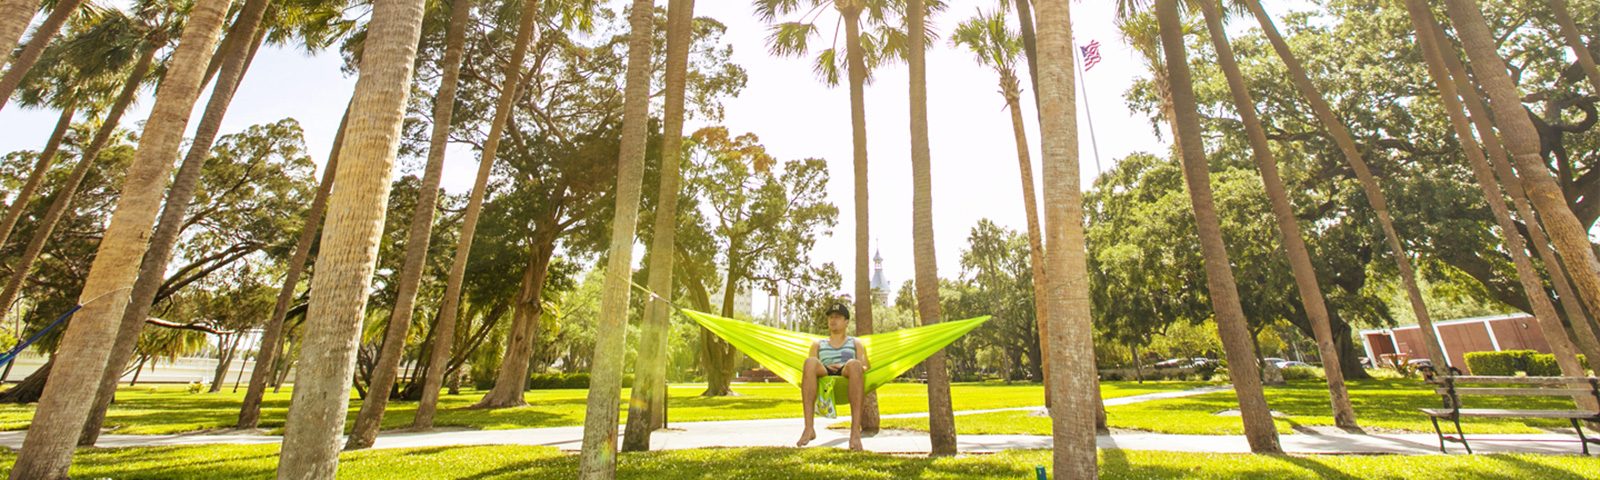 Student in a hammock in Plant Park under palm trees